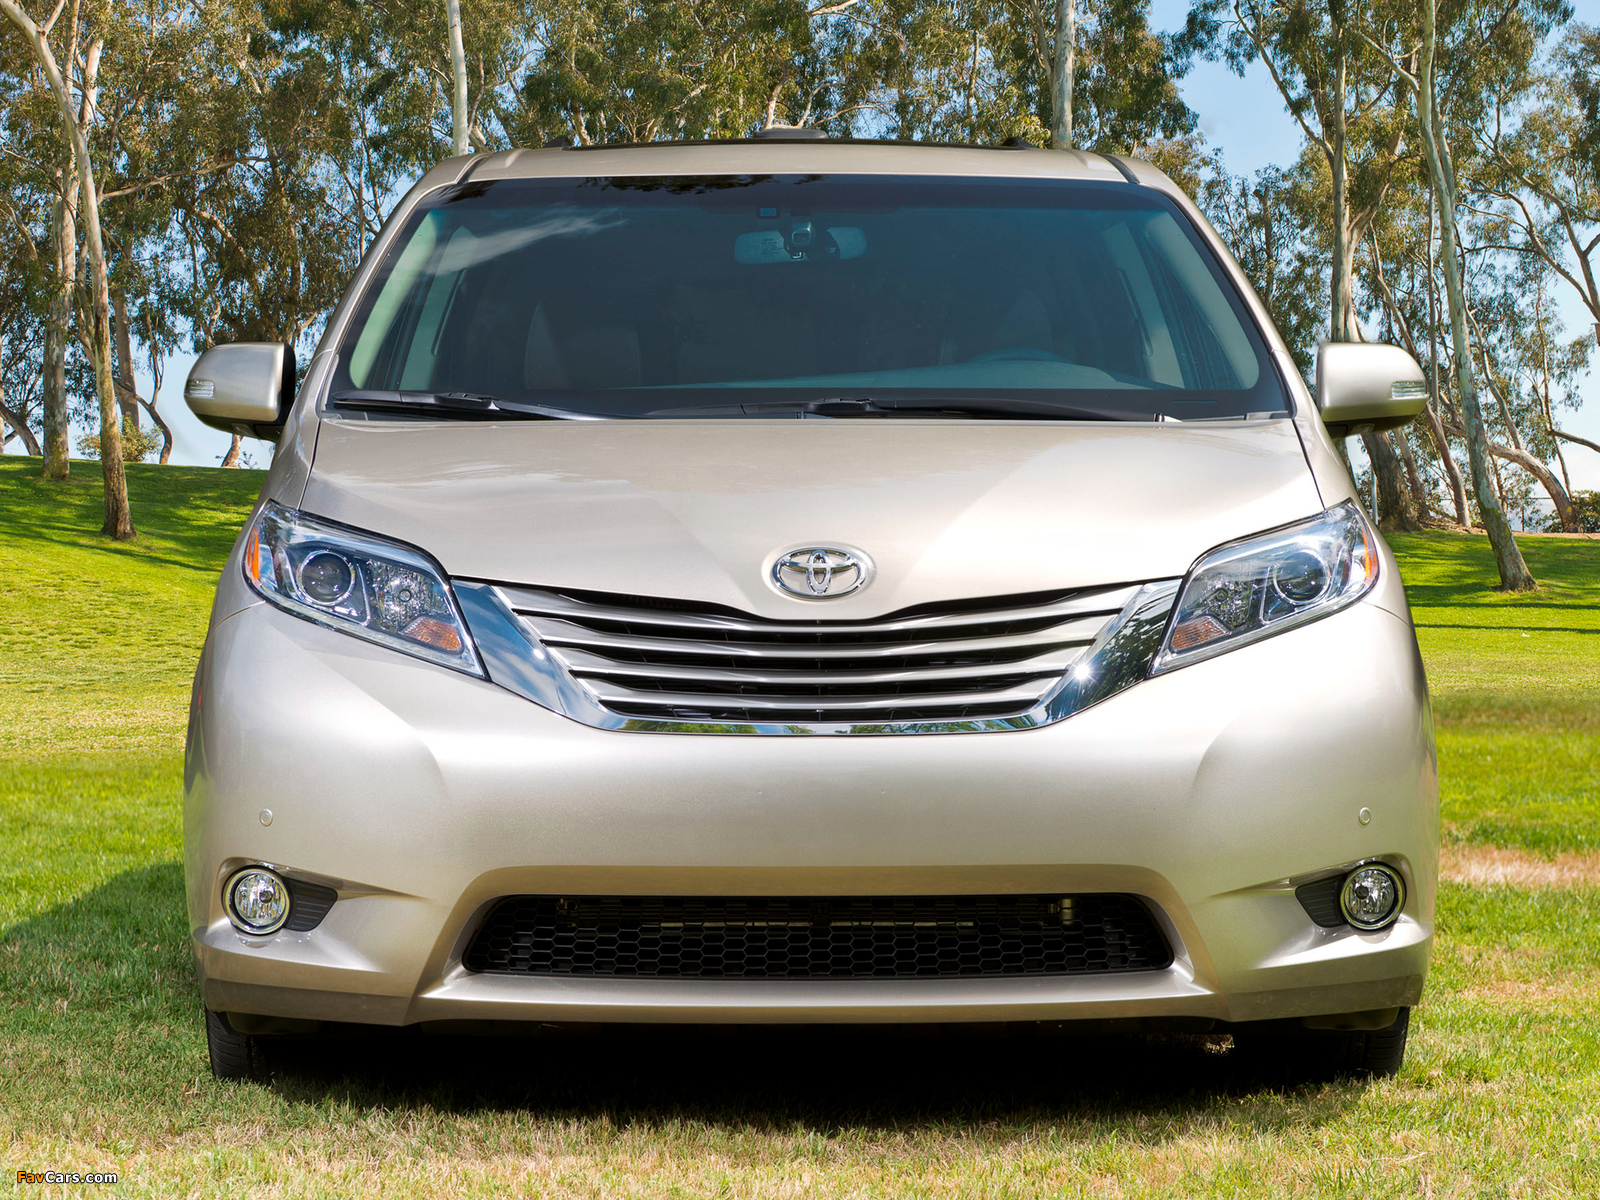 Images of 2015 Toyota Sienna 2014 (1600 x 1200)